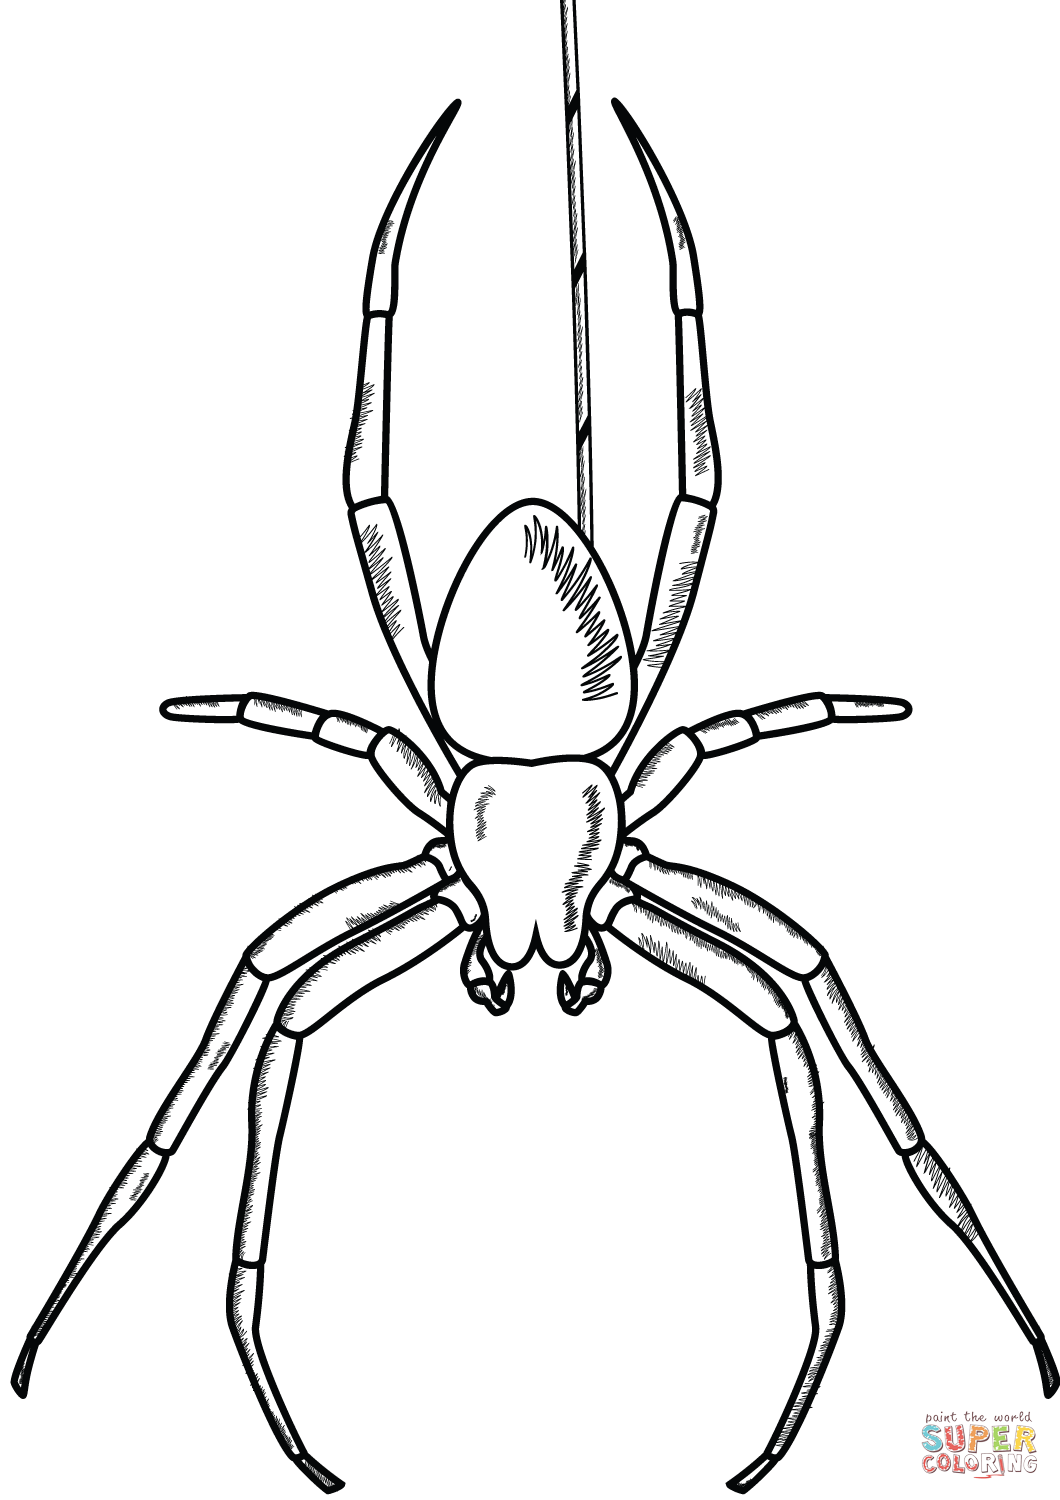 black widow spider coloring pages spiders coloring pages supercoloringcom spider coloring pages black widow 